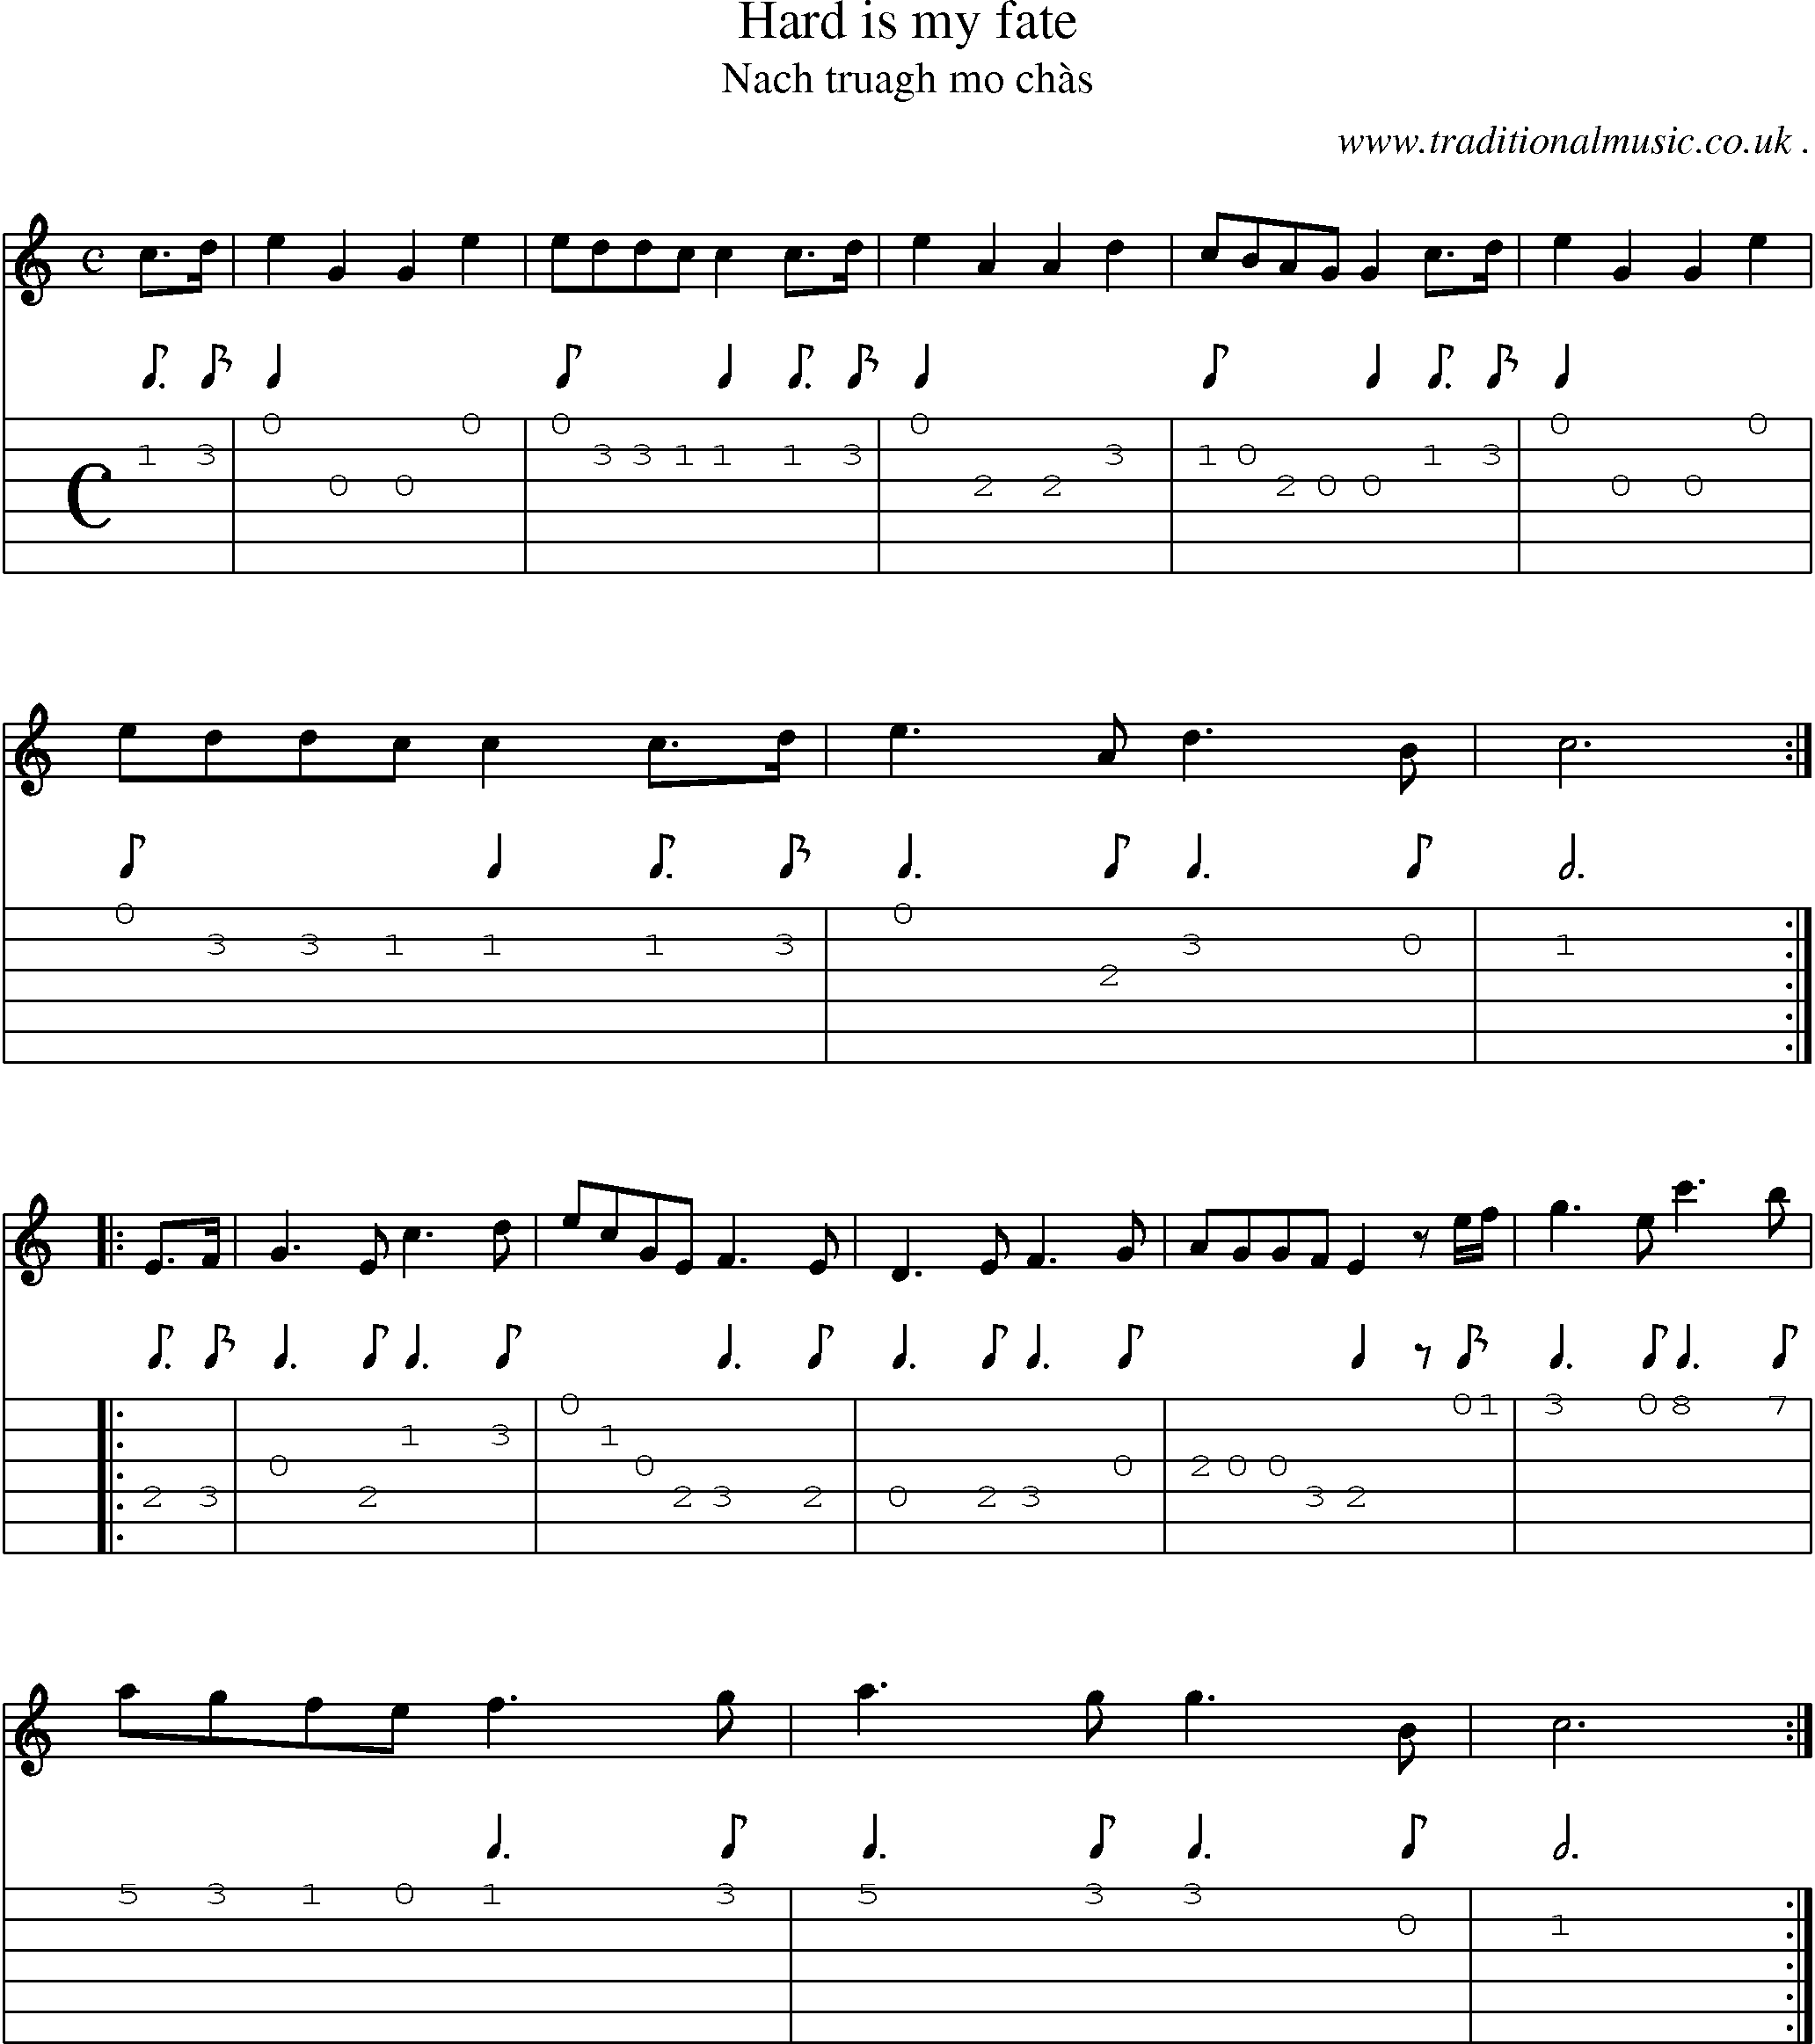 Sheet-music  score, Chords and Guitar Tabs for Hard Is My Fate